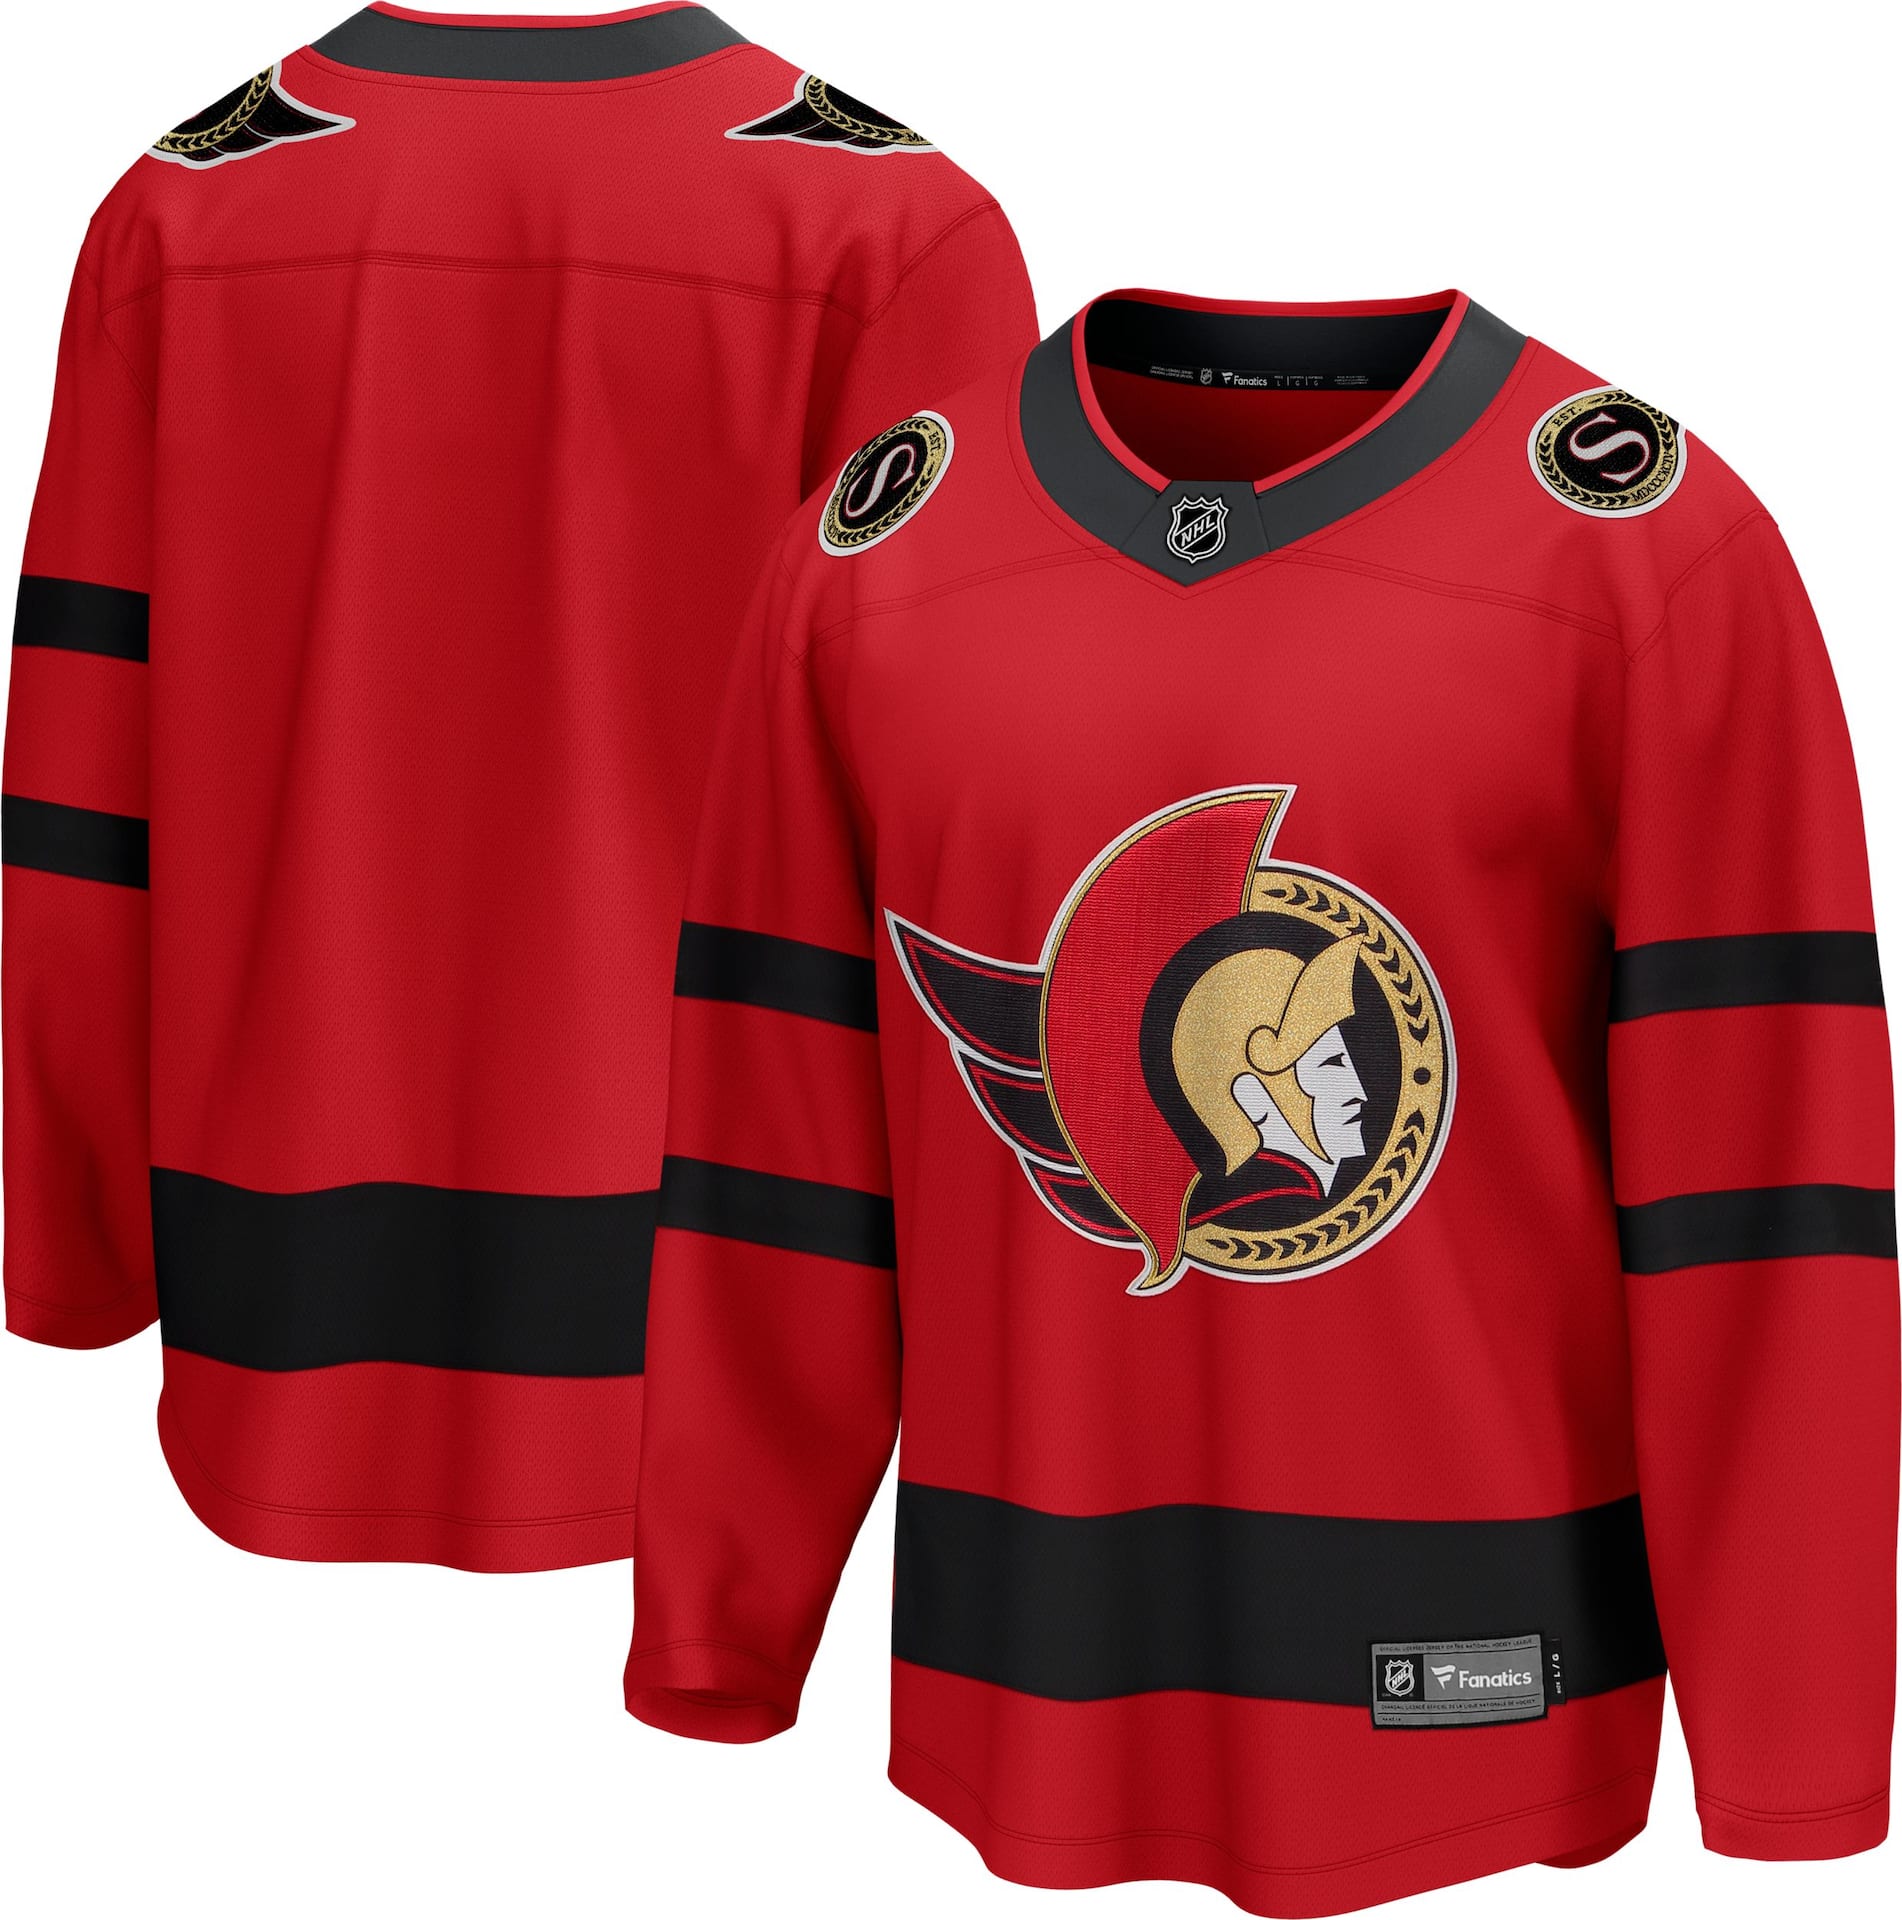 What could've been - a reverse retro concept by BarDown : r/OttawaSenators